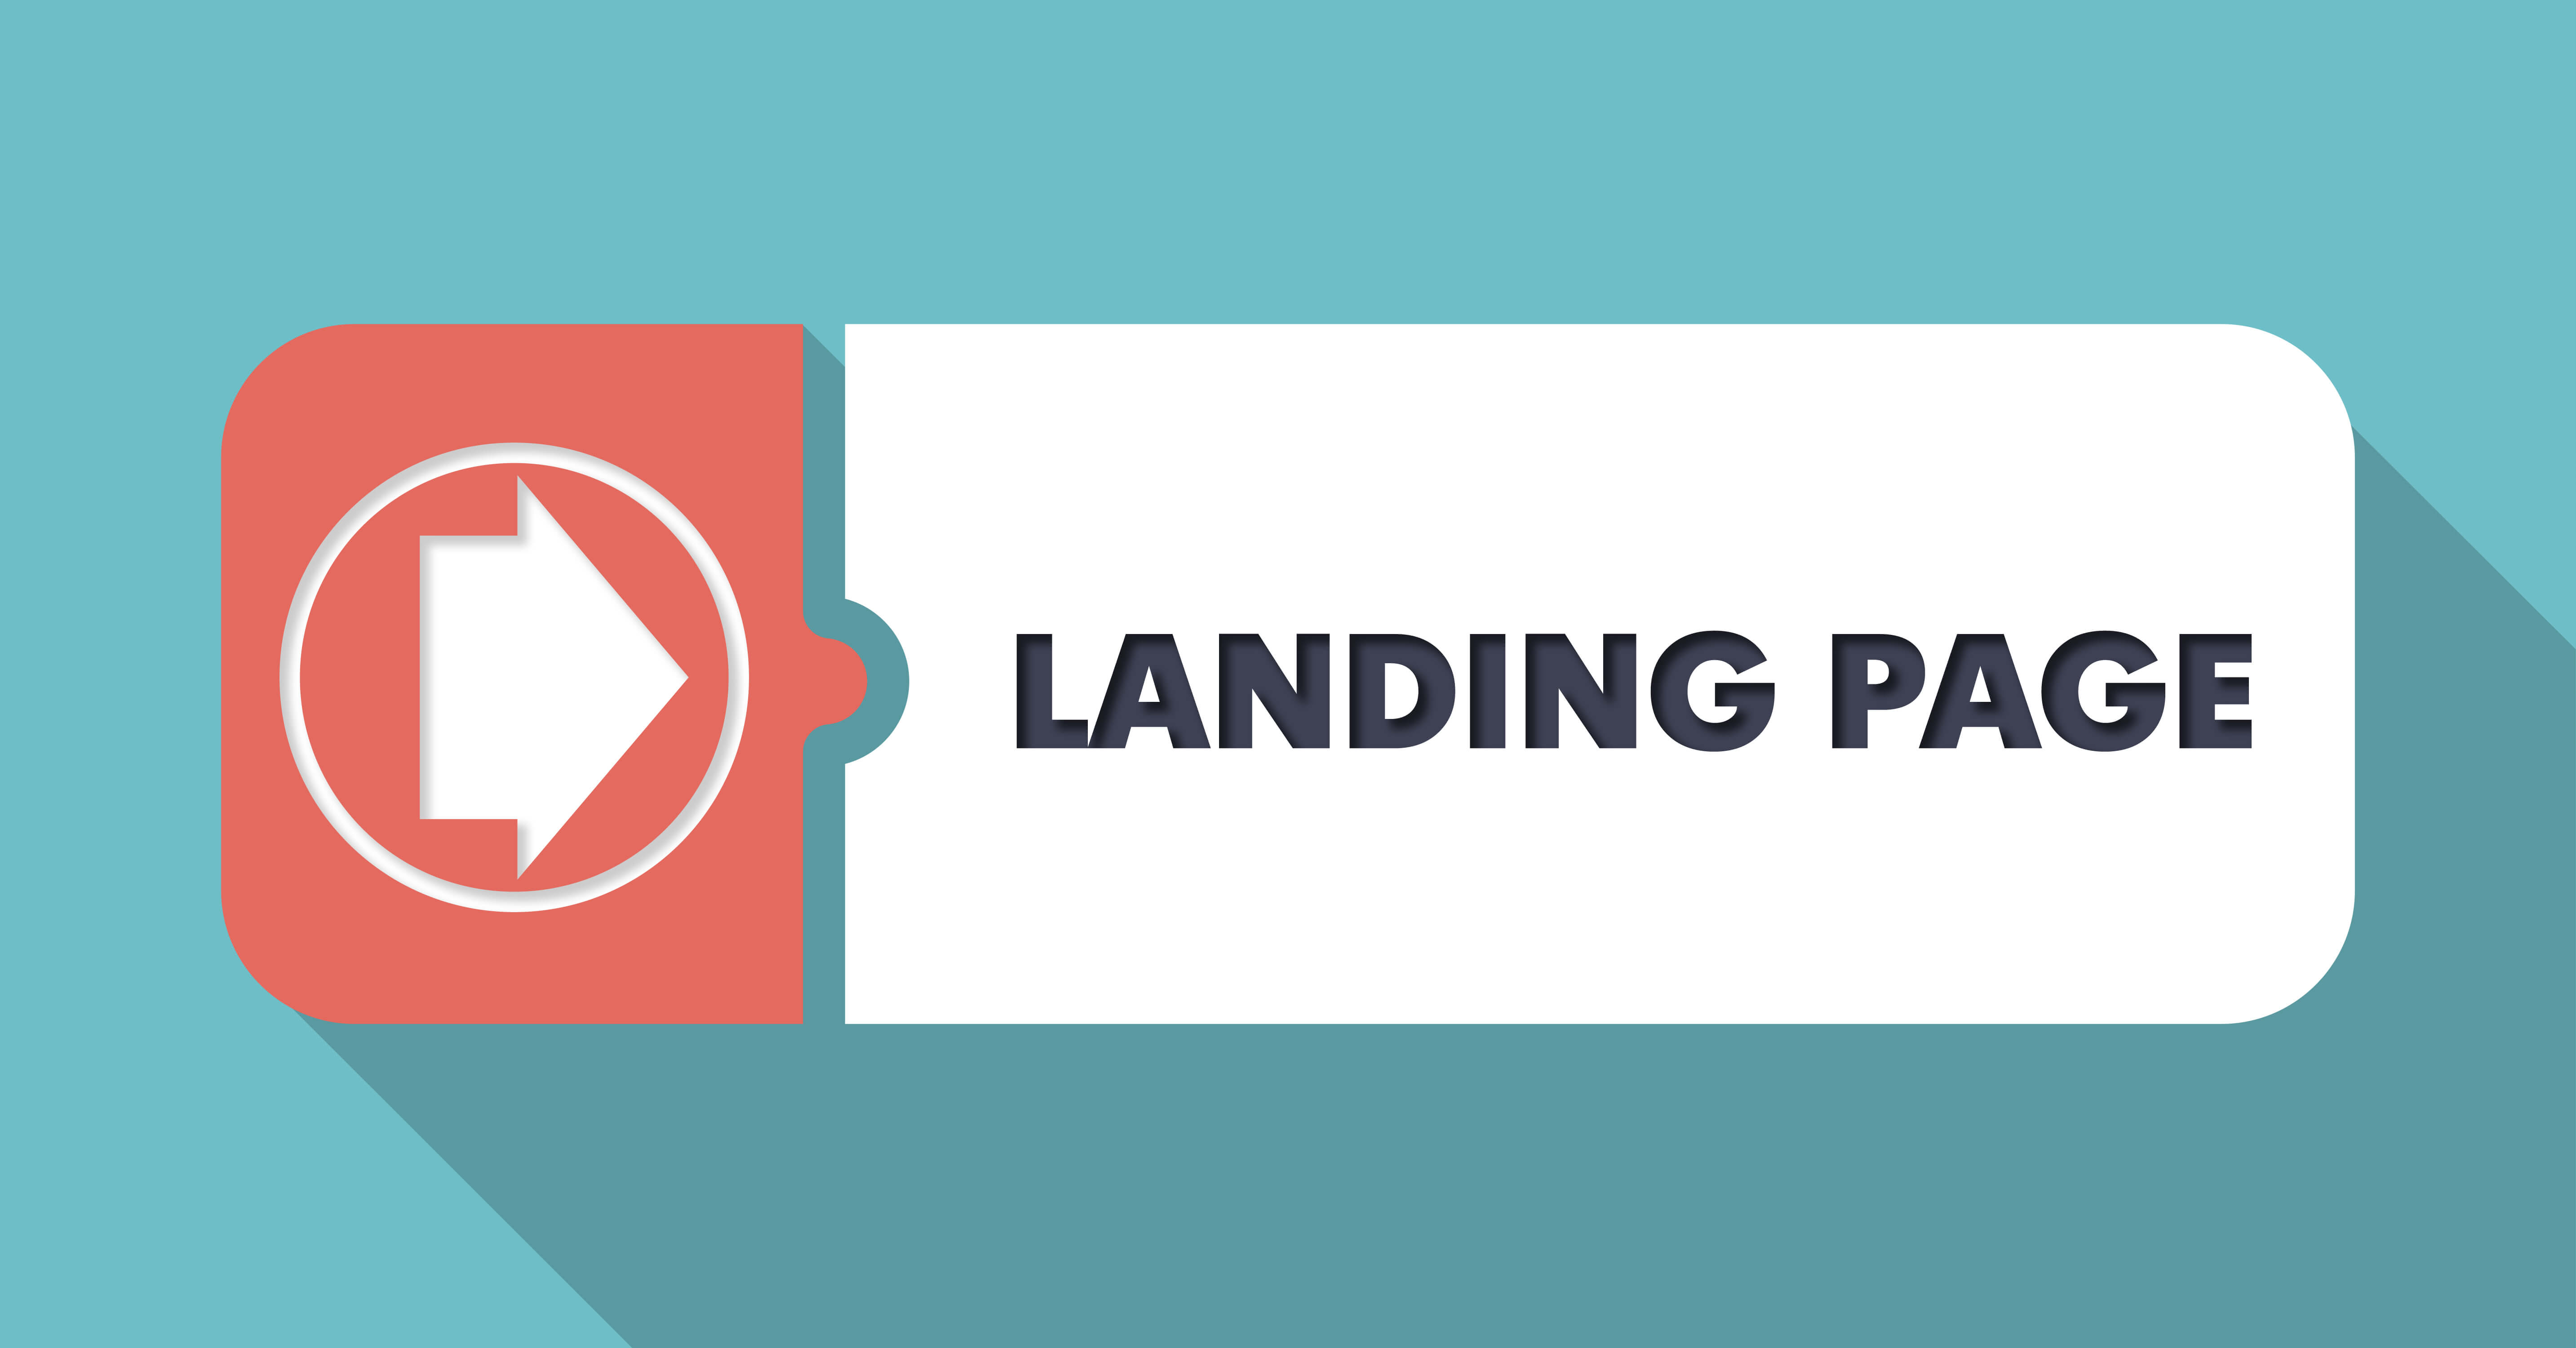 7 Most Important Elements of an Effective Landing Page